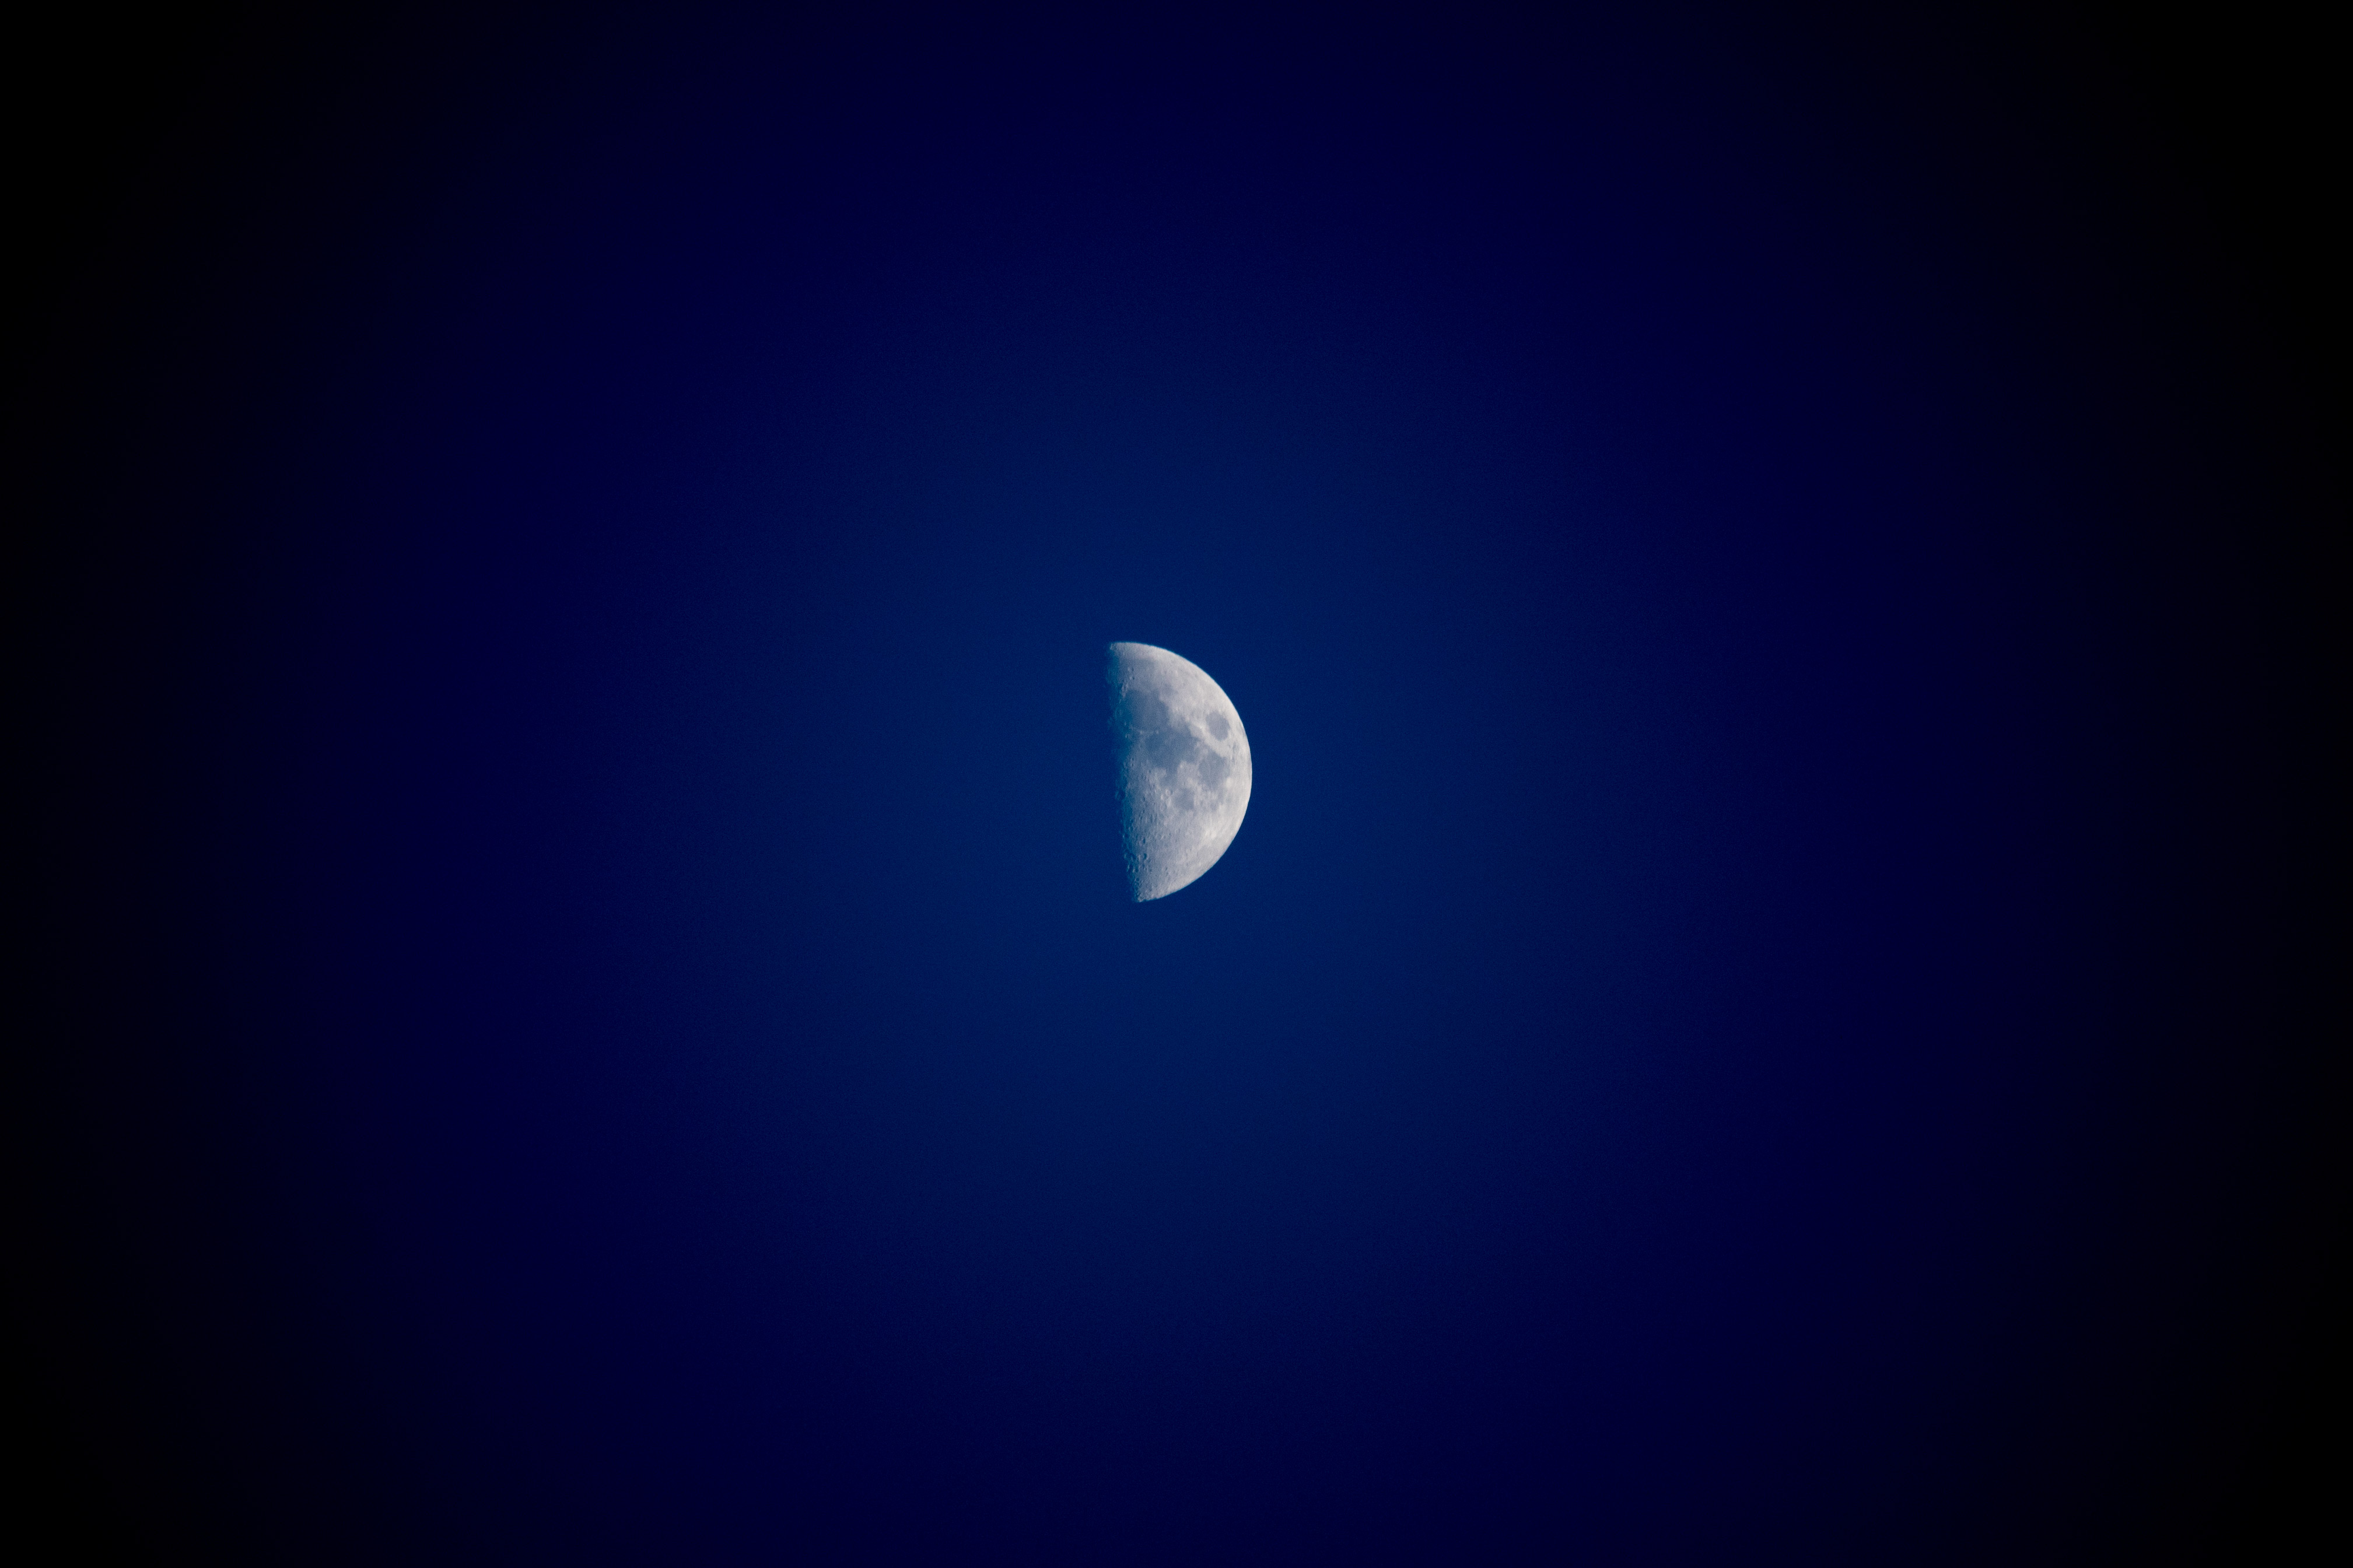 Pale half-moon against a blue background with strong vignetting